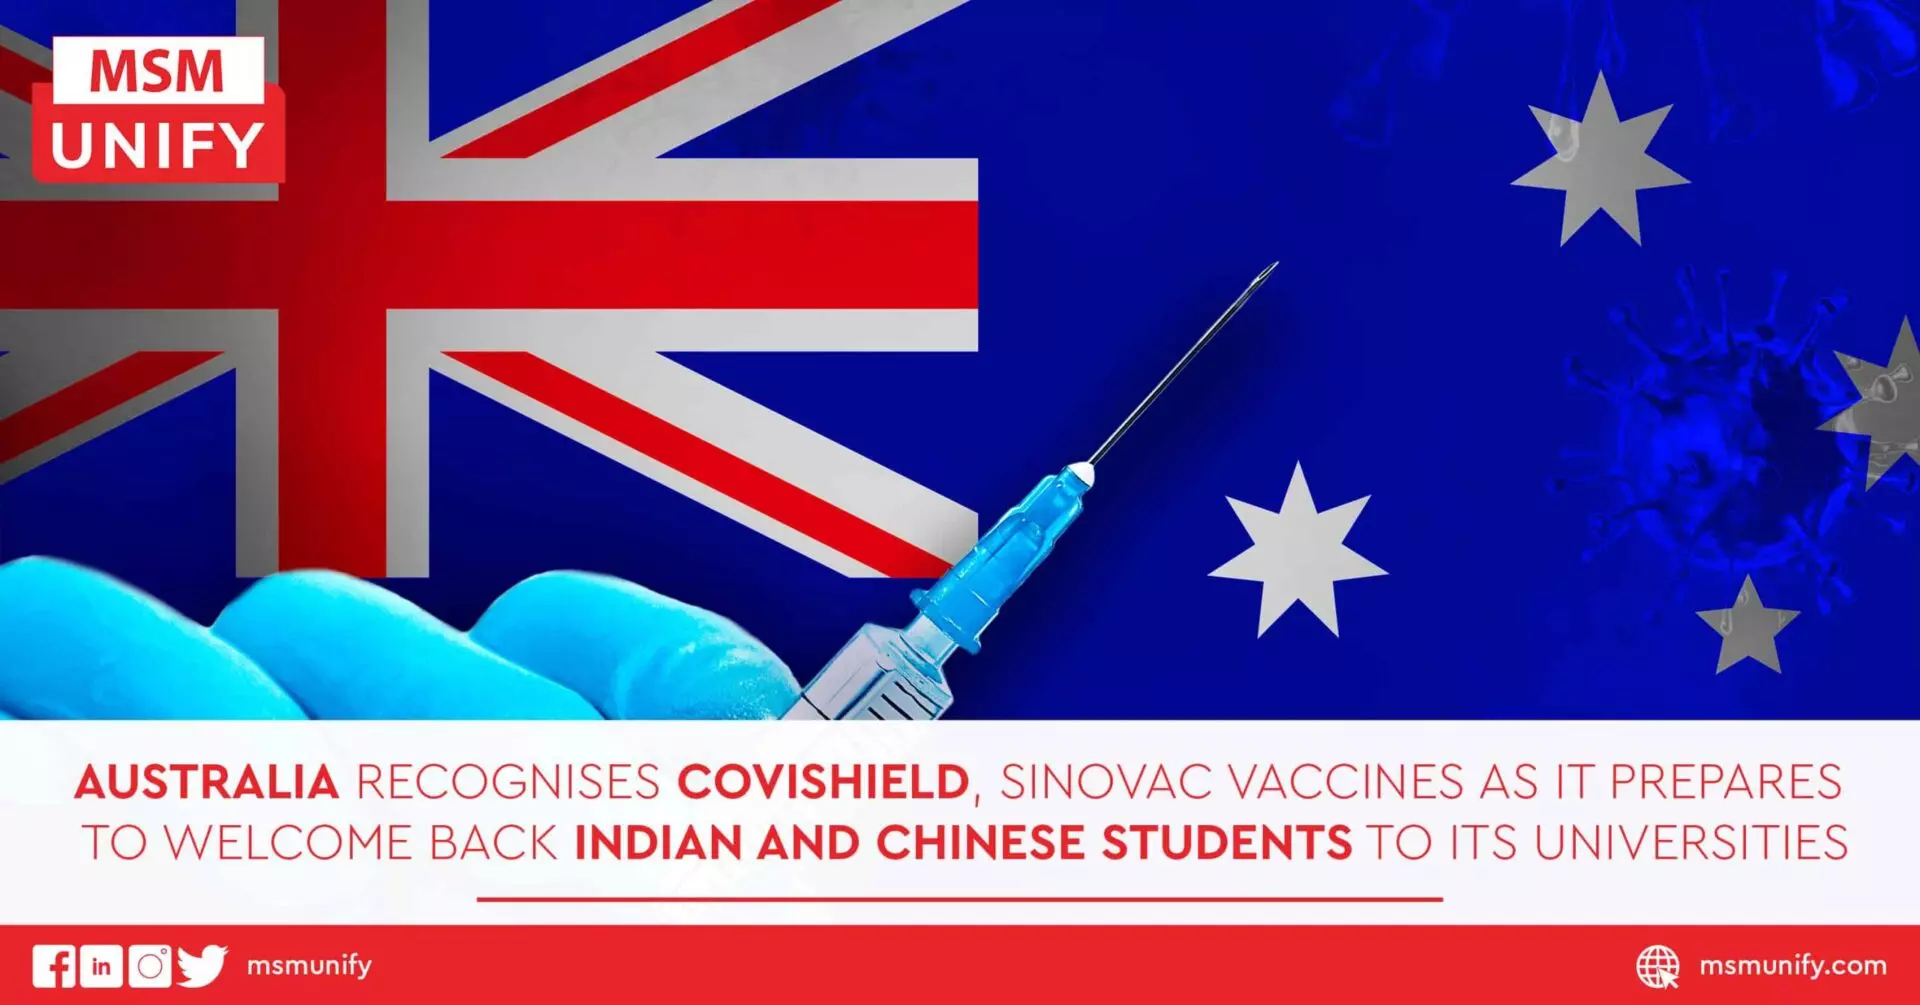 Australia Recognises Covishield Sinovac Vaccines As It Prepares To Welcome Back Indian and Chinese Students To Its Universities scaled 1